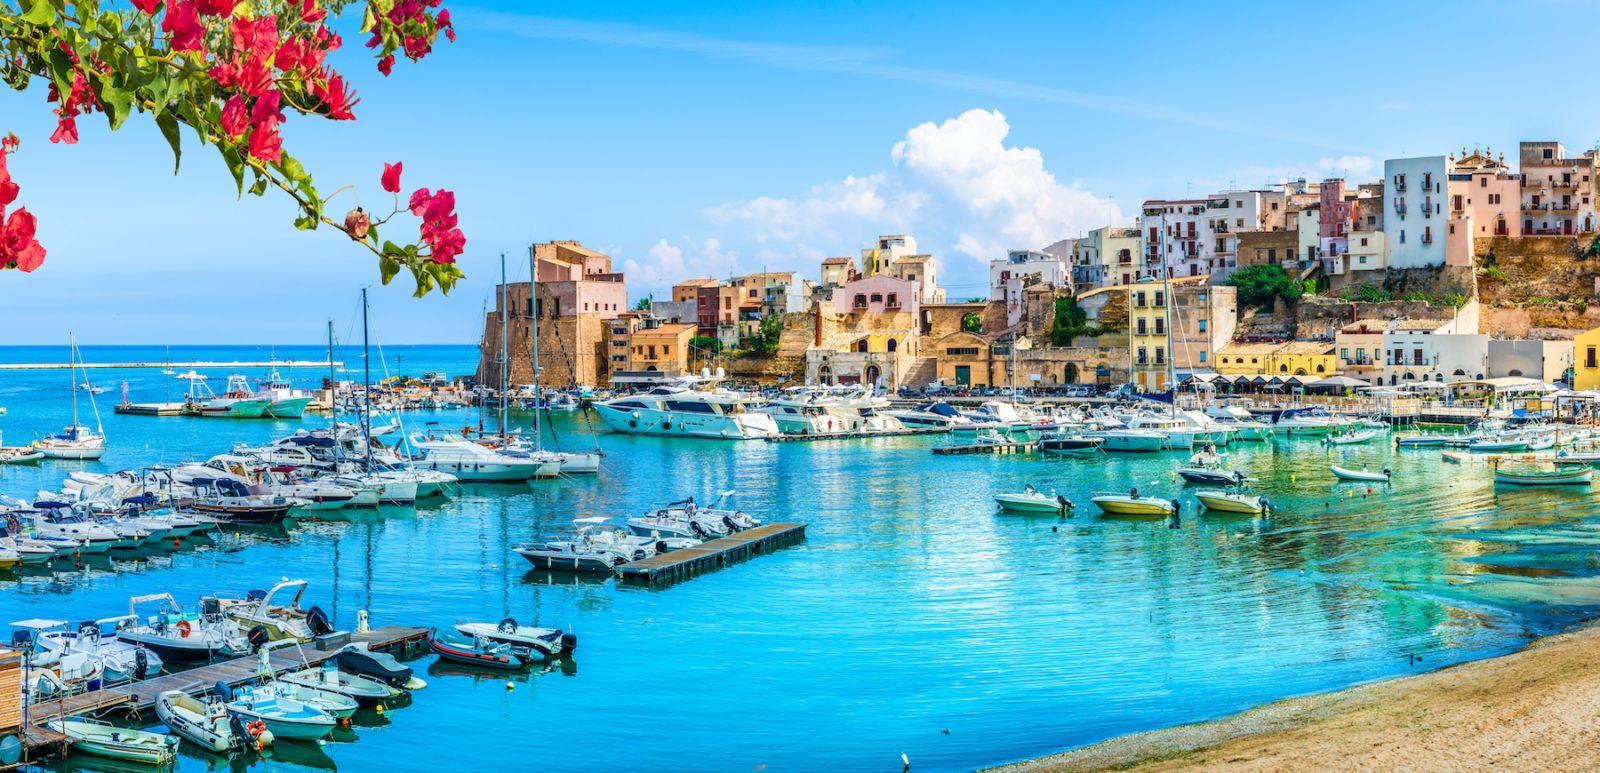 [Closed] CHANCE TO WIN: A Once-in-a-Lifetime Getaway to Sicily